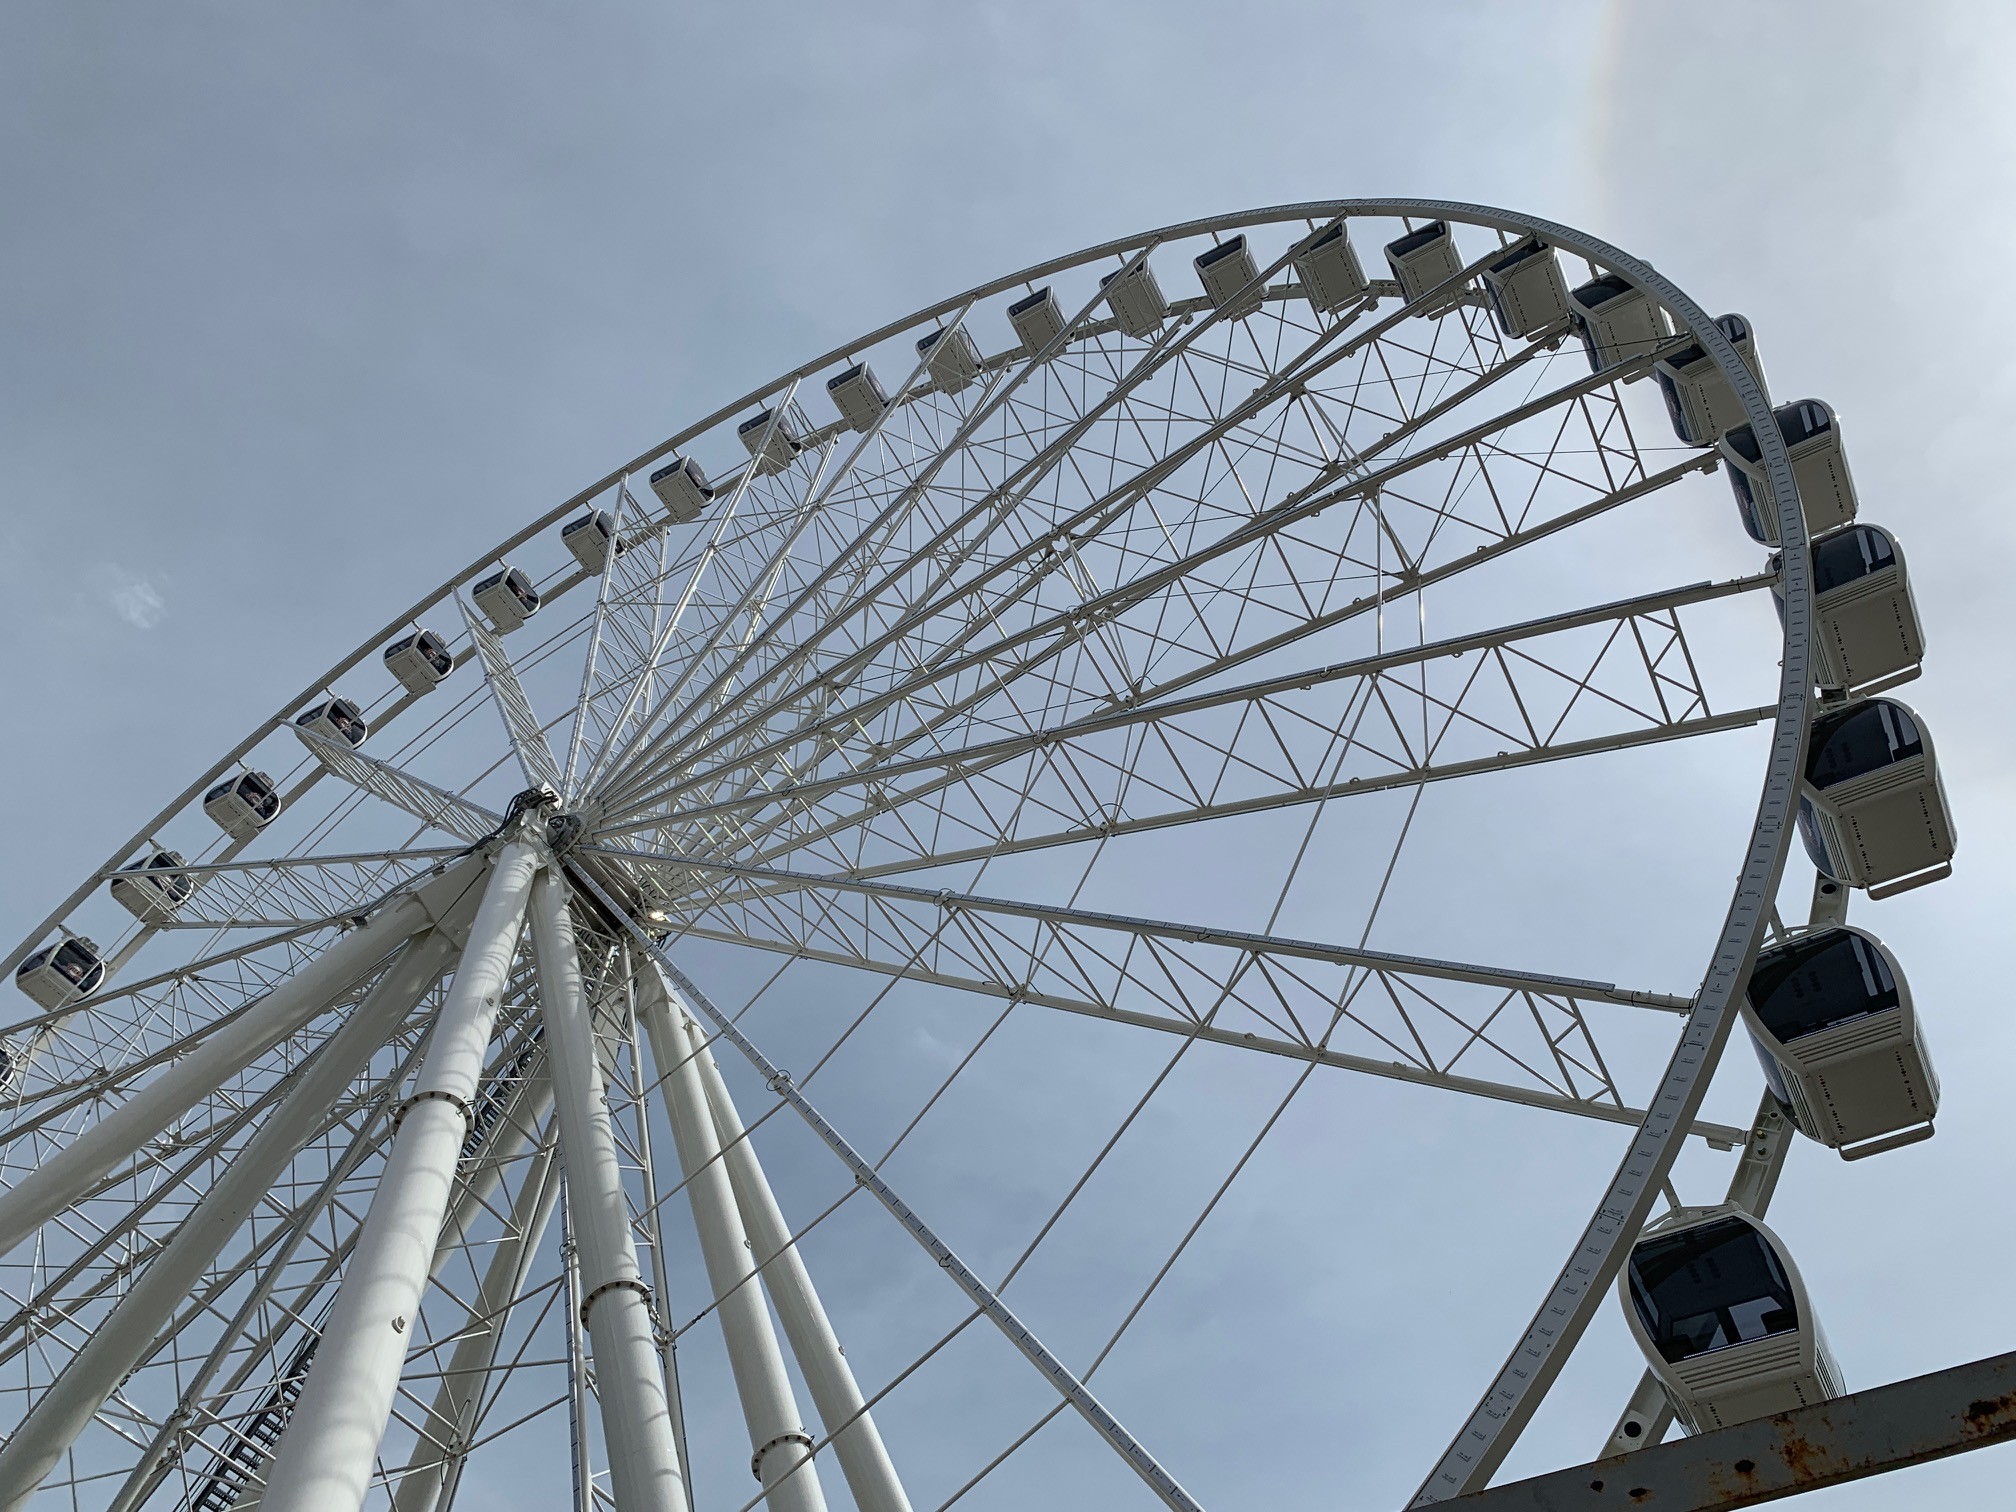 St. Louis Wheel Opens Today, Movie Nights Start This Weekend | Arts Blog